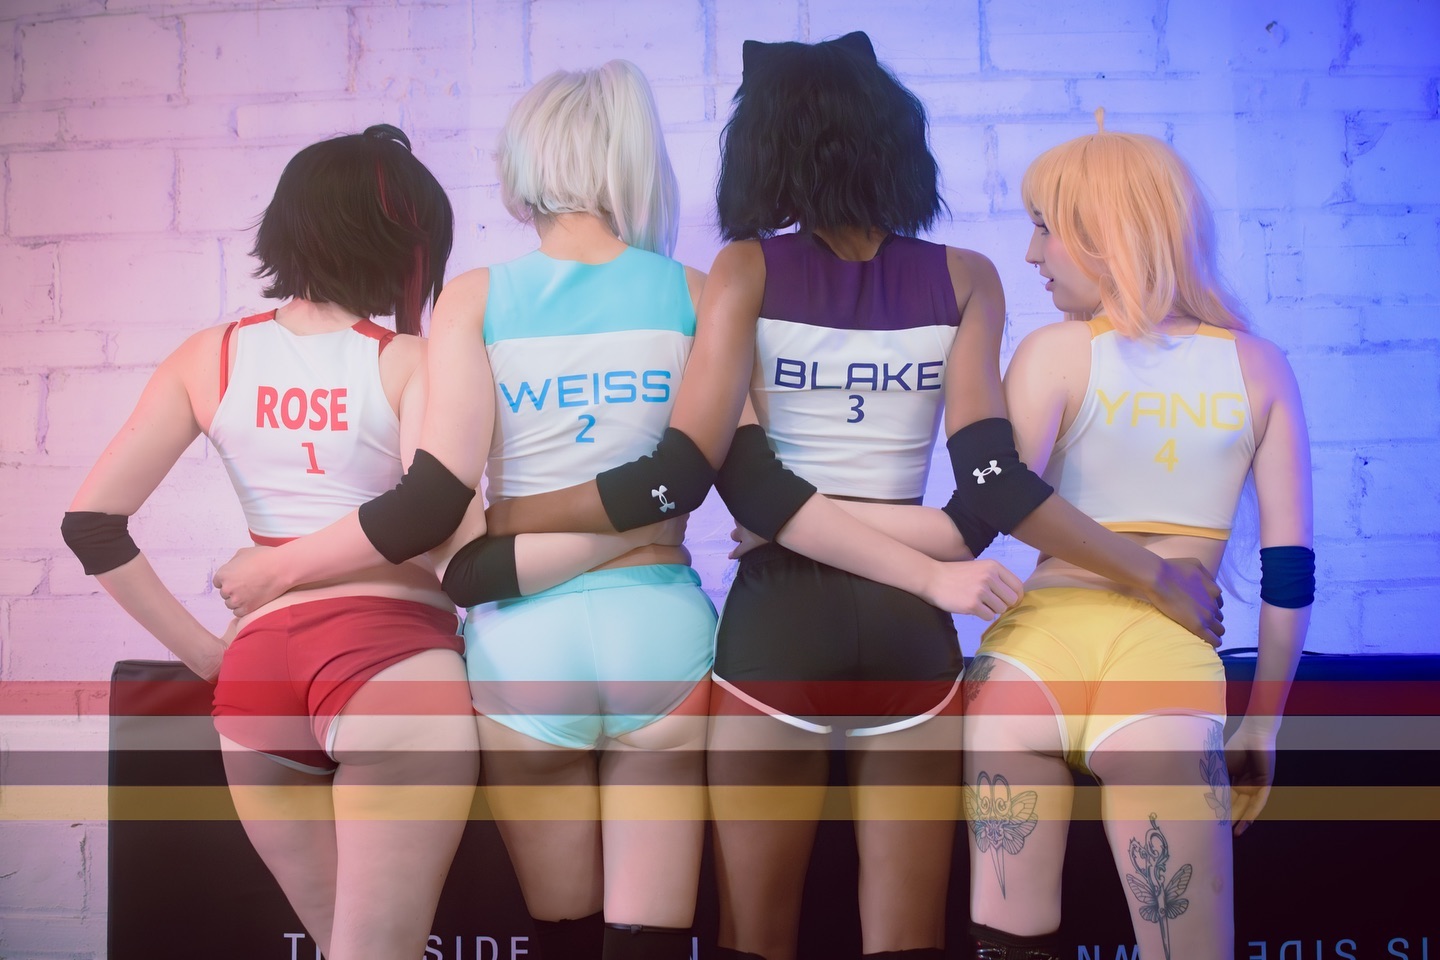 FULL TEAM WORKOUT RWBY!
Would you workout with us 💪

We have been planning this group for a long time!  We are so excited to share it with you!

Set is available via G✨mroad (see story highlight) for limited time (till May 17th)

❤️ @mangoloo.cos 
🤍 @luxstrous 
🖤 @cheesecakedruid 
💛 @gillianfoxglove 

📸 @jakescribbles 

#rwbycosplay #rwby #rubycosplay #blakecosplay #yangcosplay #weisscosplay #rubyrose #weissschnee #blakebelladonna #yangxiaolong